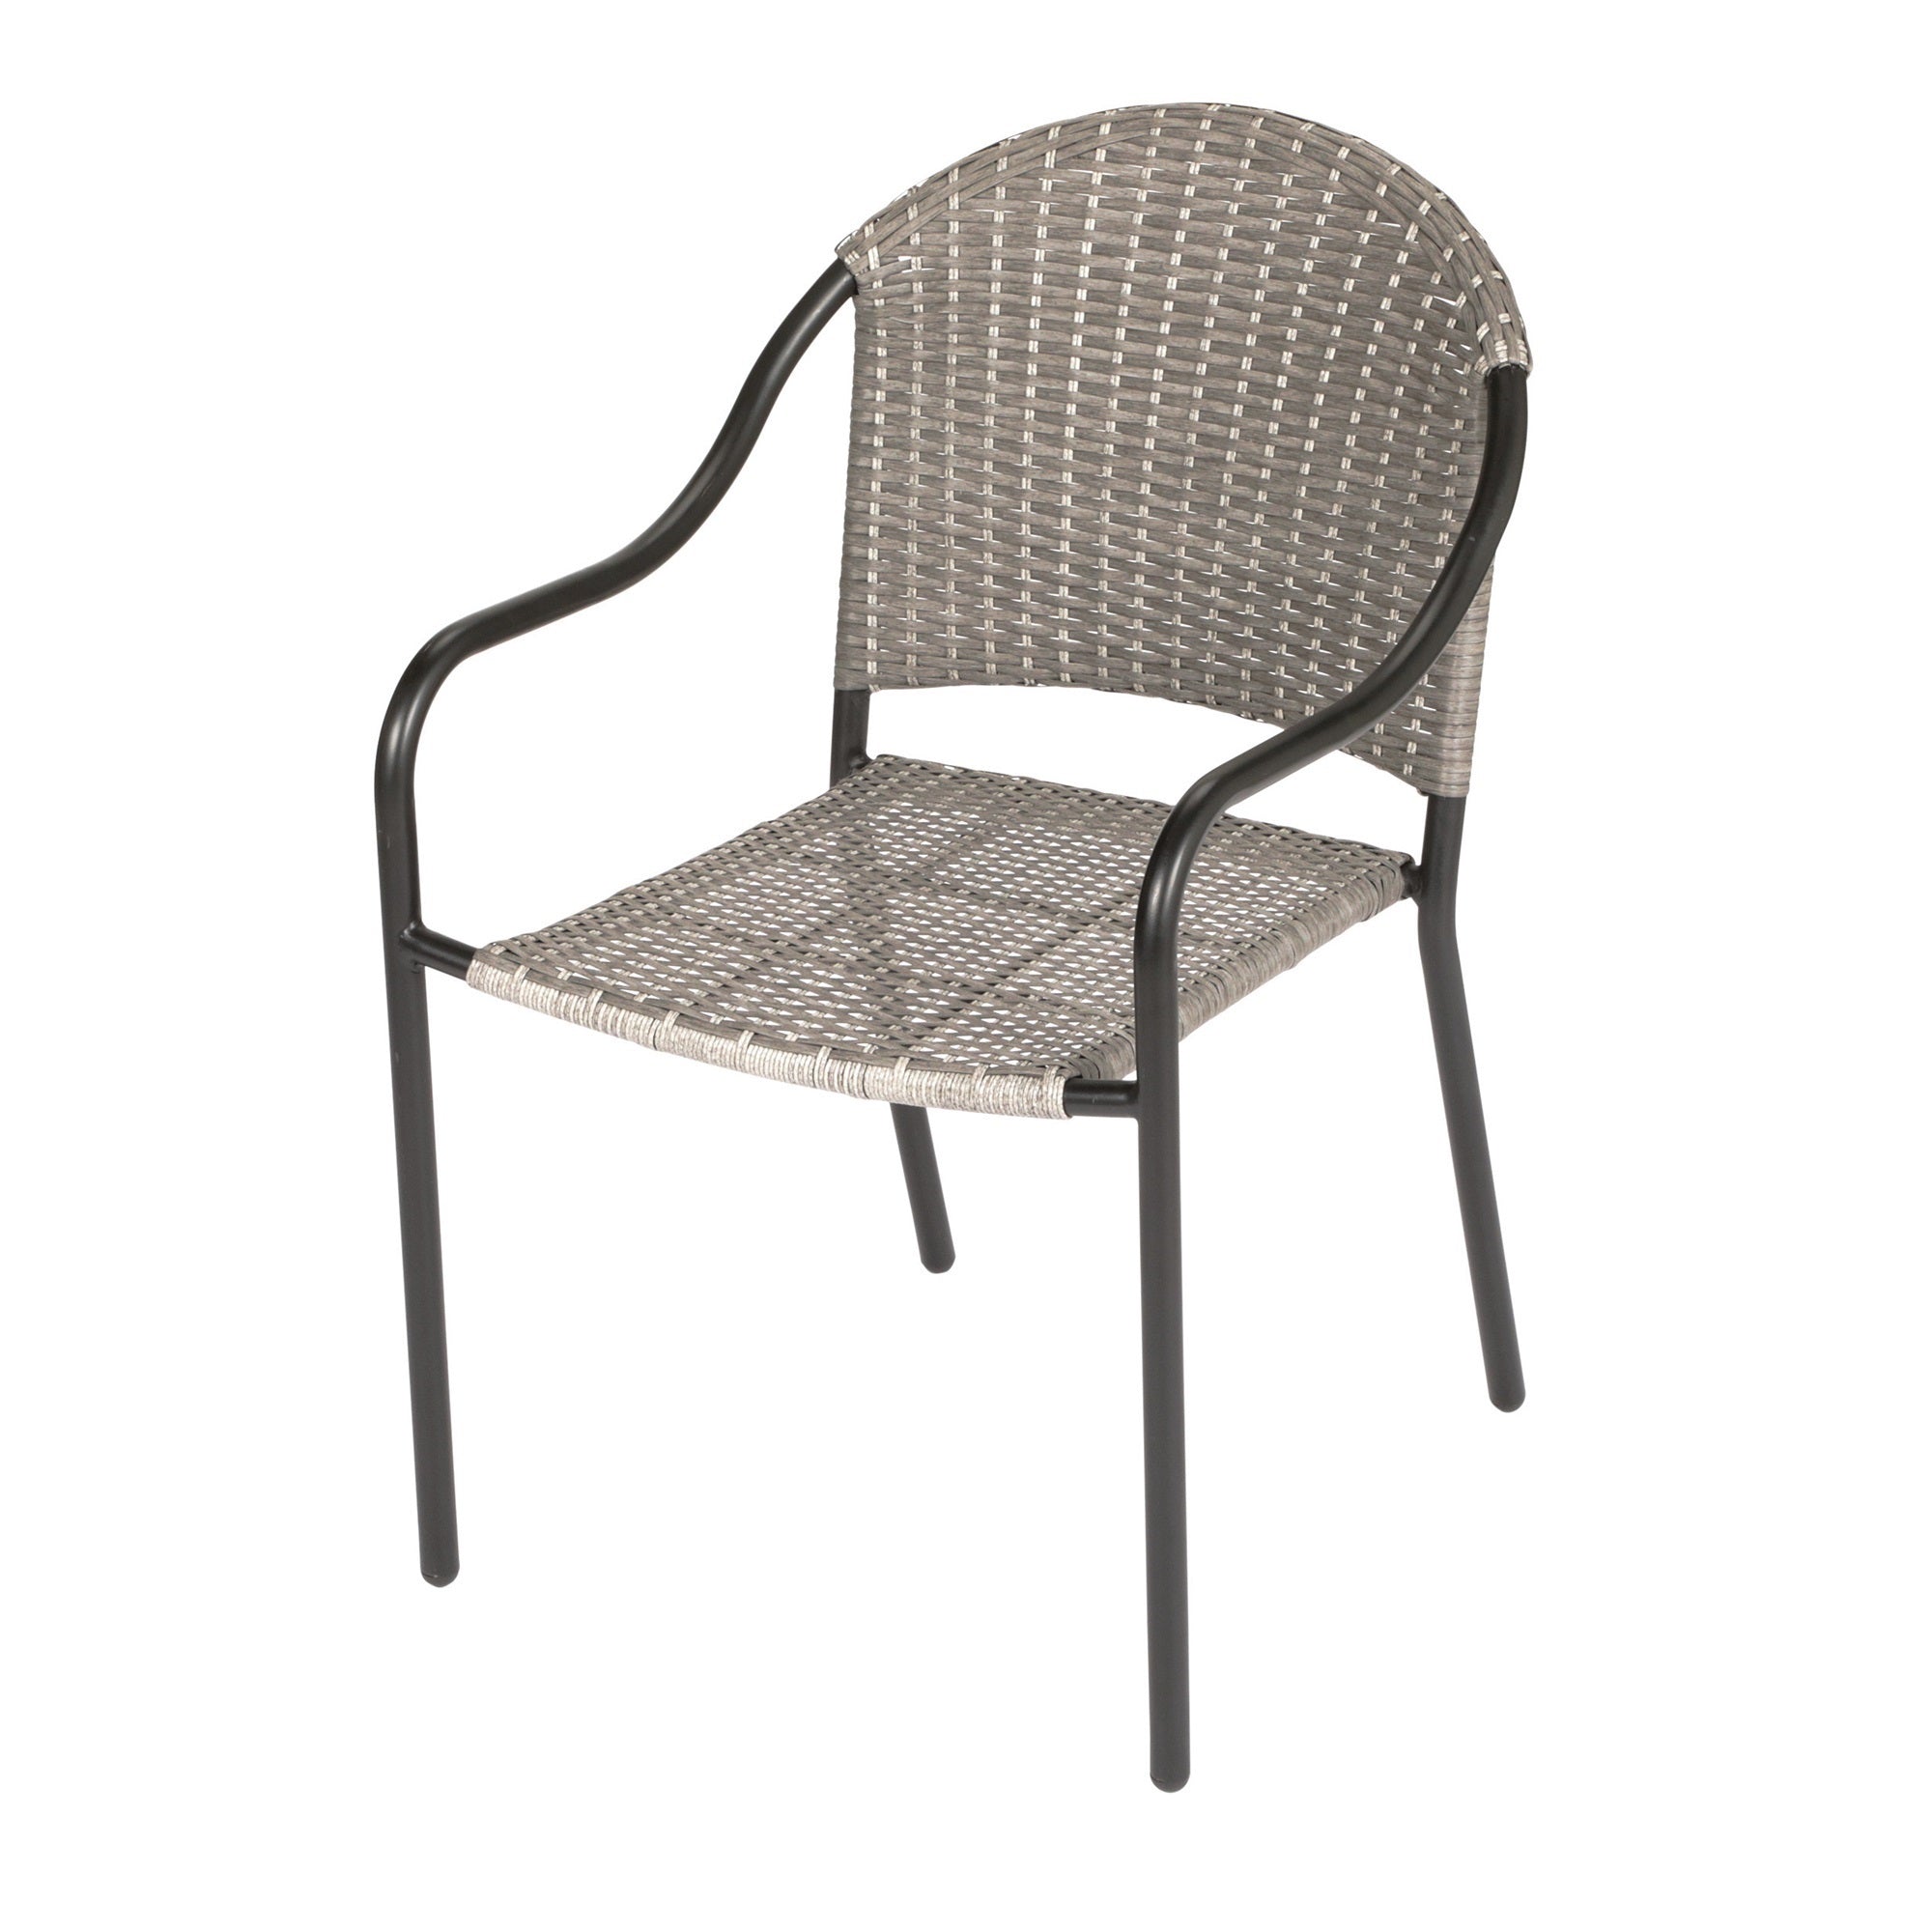 Four Seasons Courtyard Gray Marbella Wicker Stacking Chair